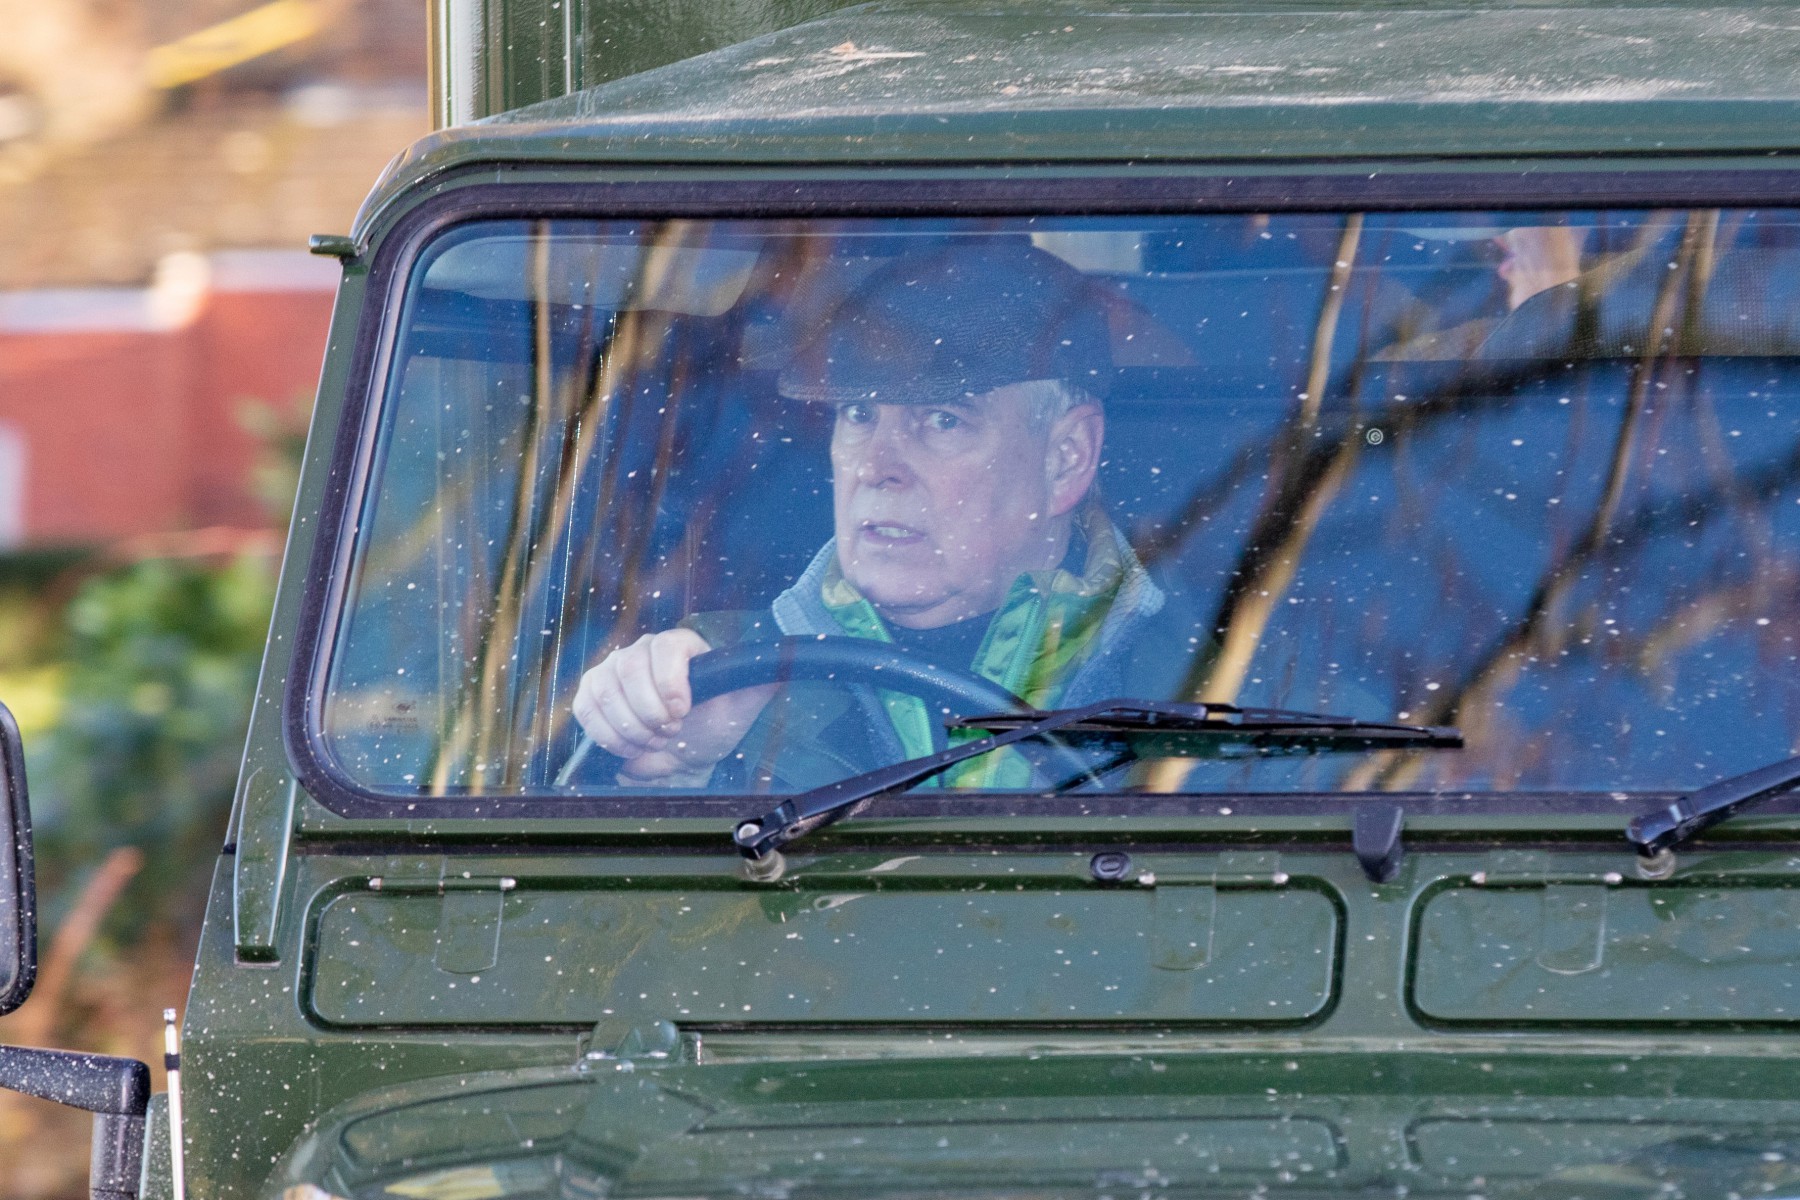 The 59-year-old royal stepped down from his royal duties following his car crash interview with BBC Newsnight